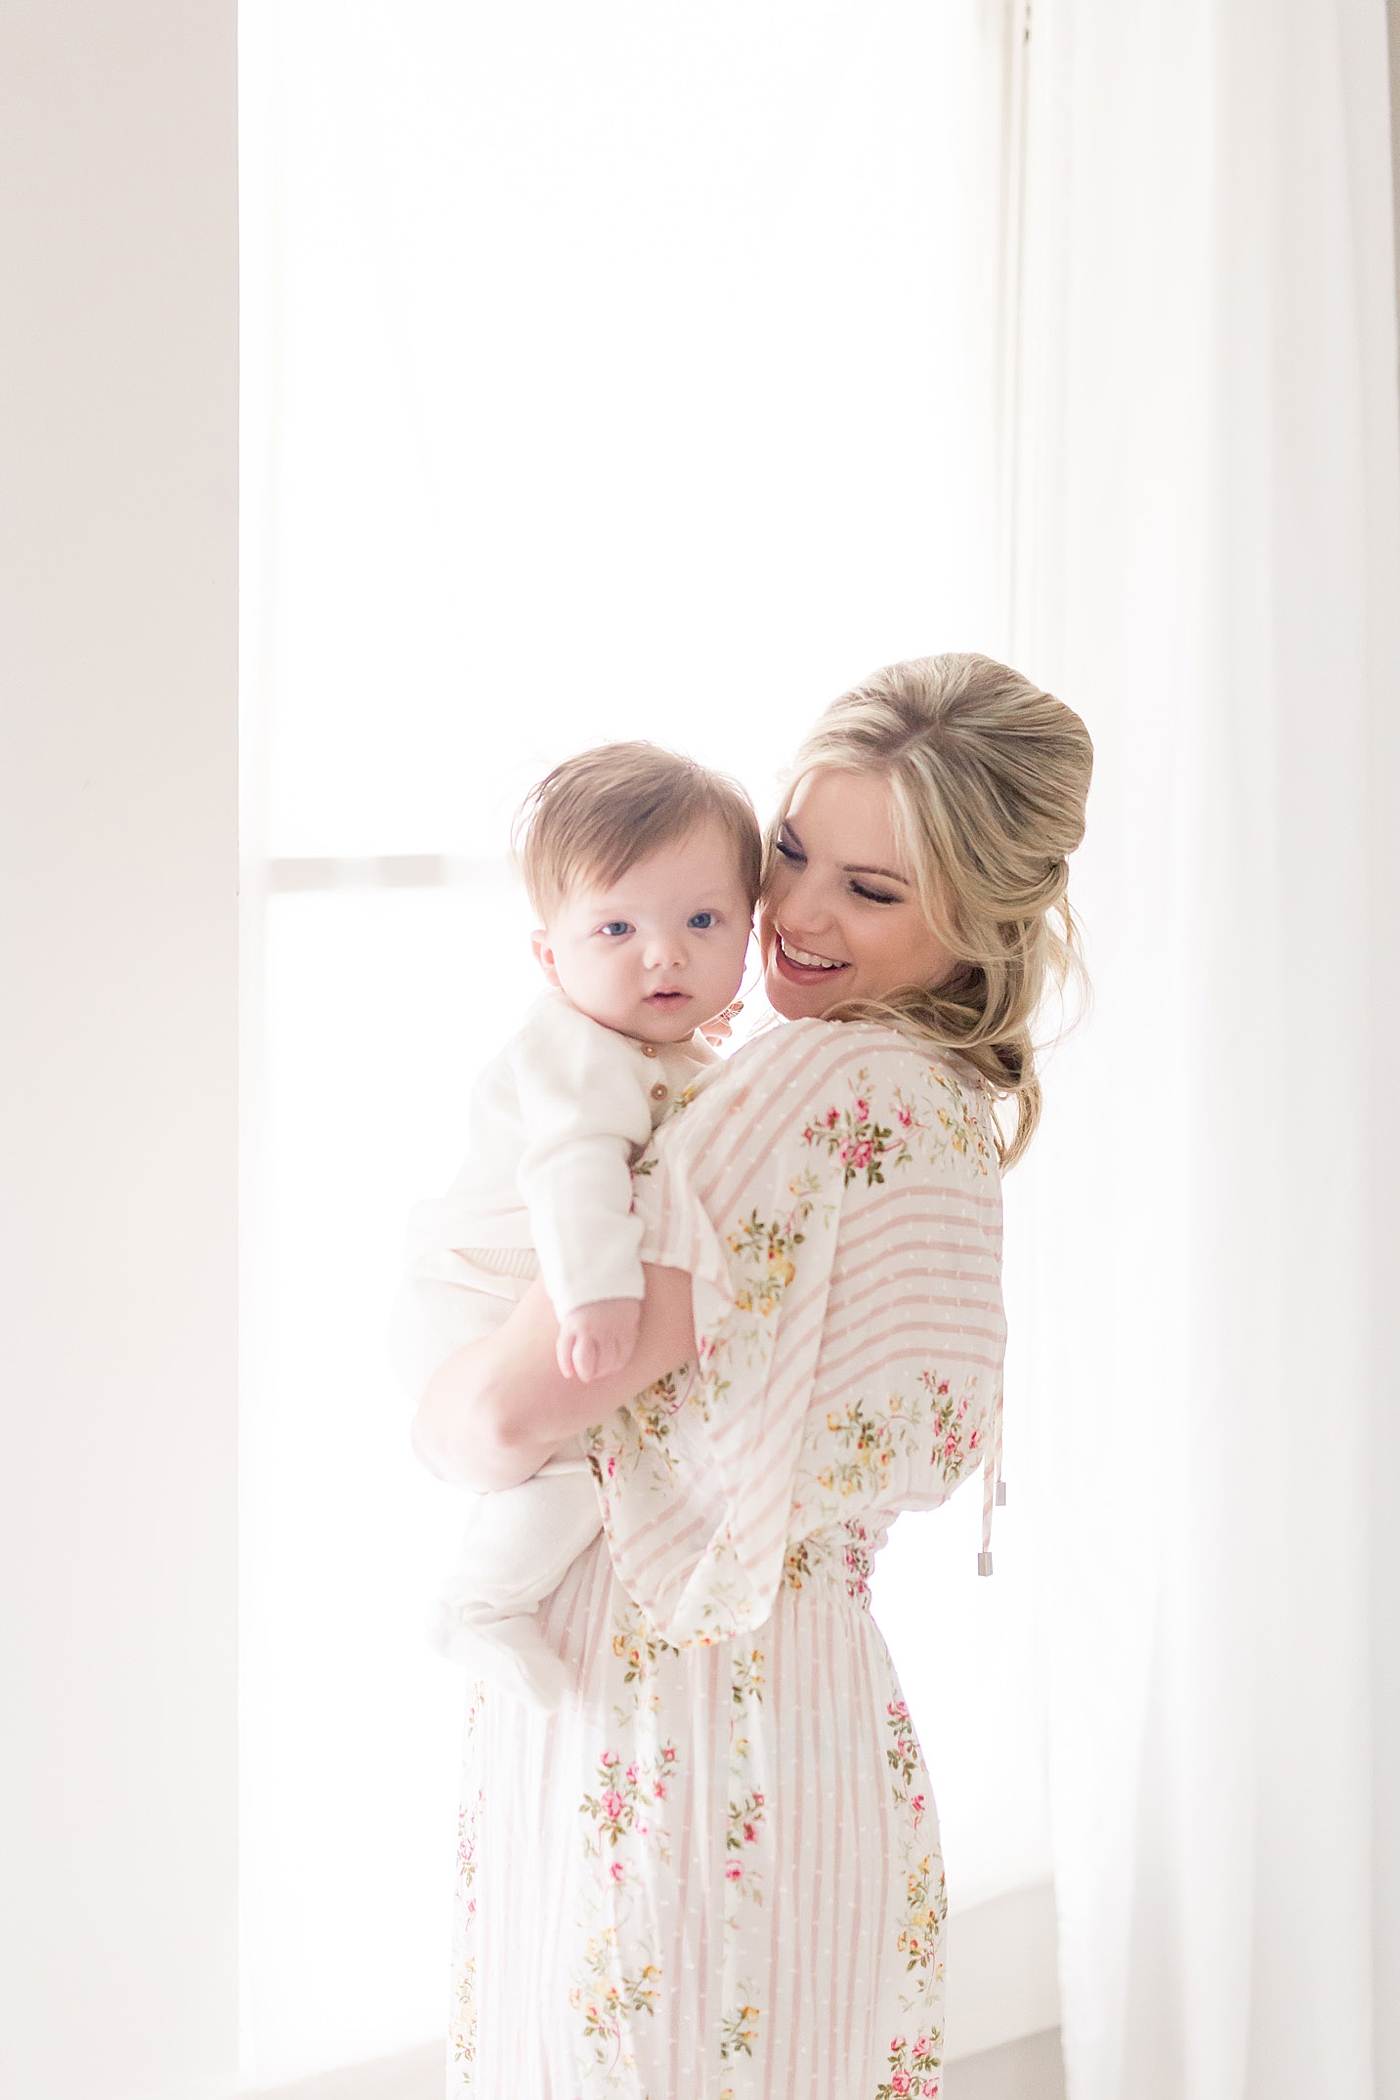 Mom and baby in front of a big window with beautiful light. Photos by Fresh Light Photography.